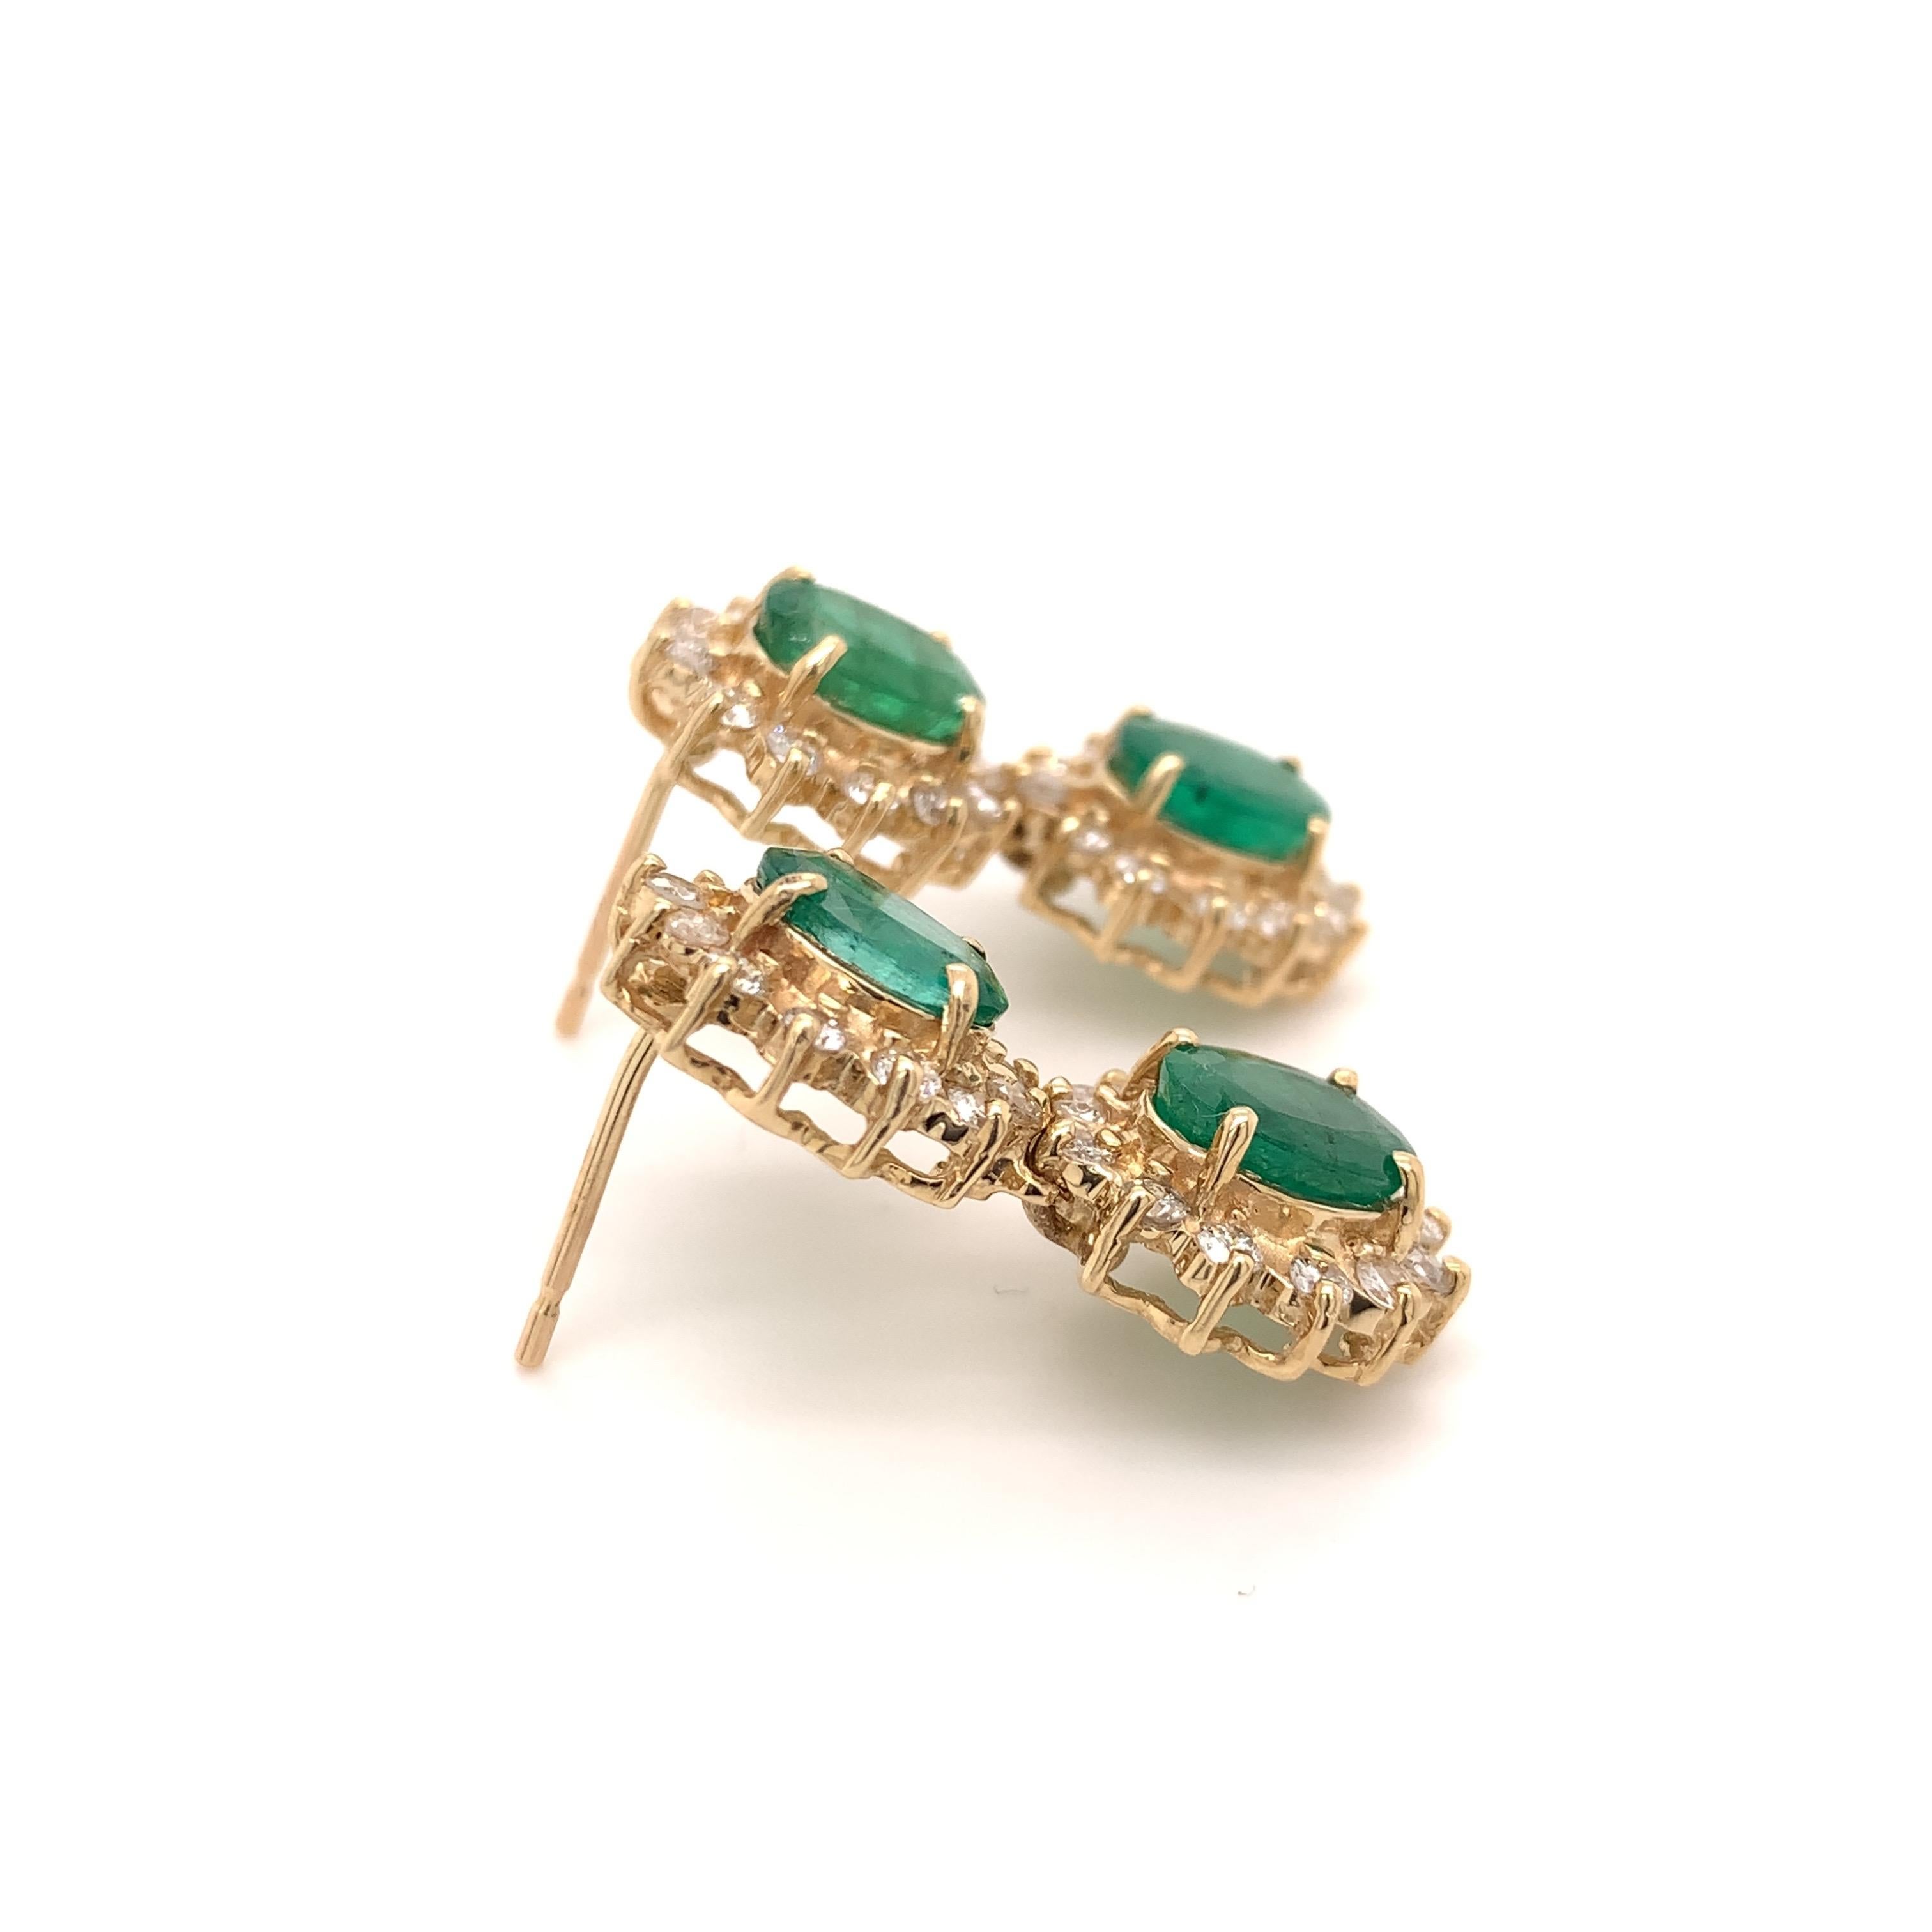 Radiant emerald dangling earrings. High brilliance, lively green tone, oval faceted, 5.29 carats natural emeralds encased in open profile mounting with four bead prongs each, accented with round brilliant cut diamonds. Handcrafted contemporary